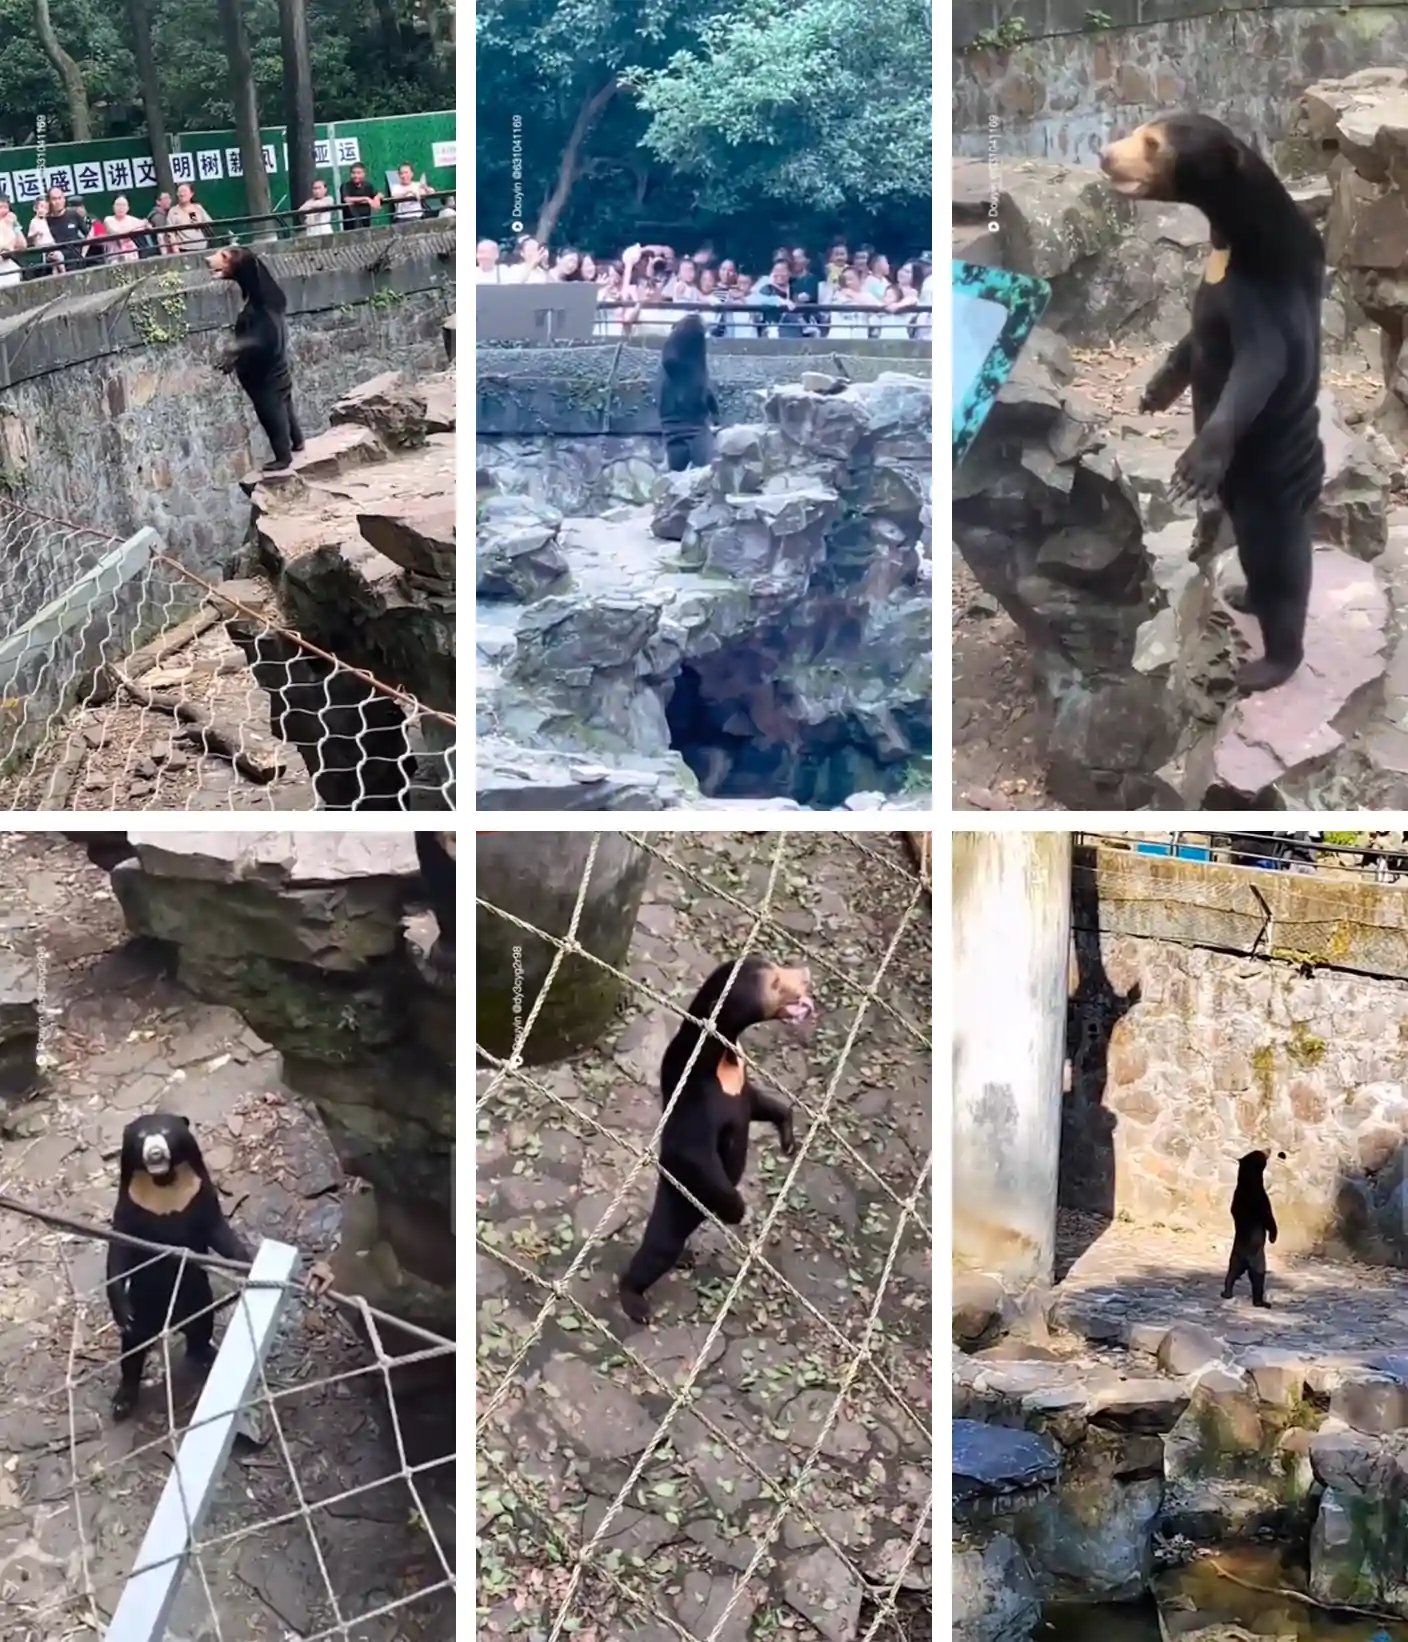 Real Bear Or Fake Bear That Divides The Internet Chinese Zoo Forced To Clarify After Video Went Viral Page 5 Eyerys bilde bilde bilde